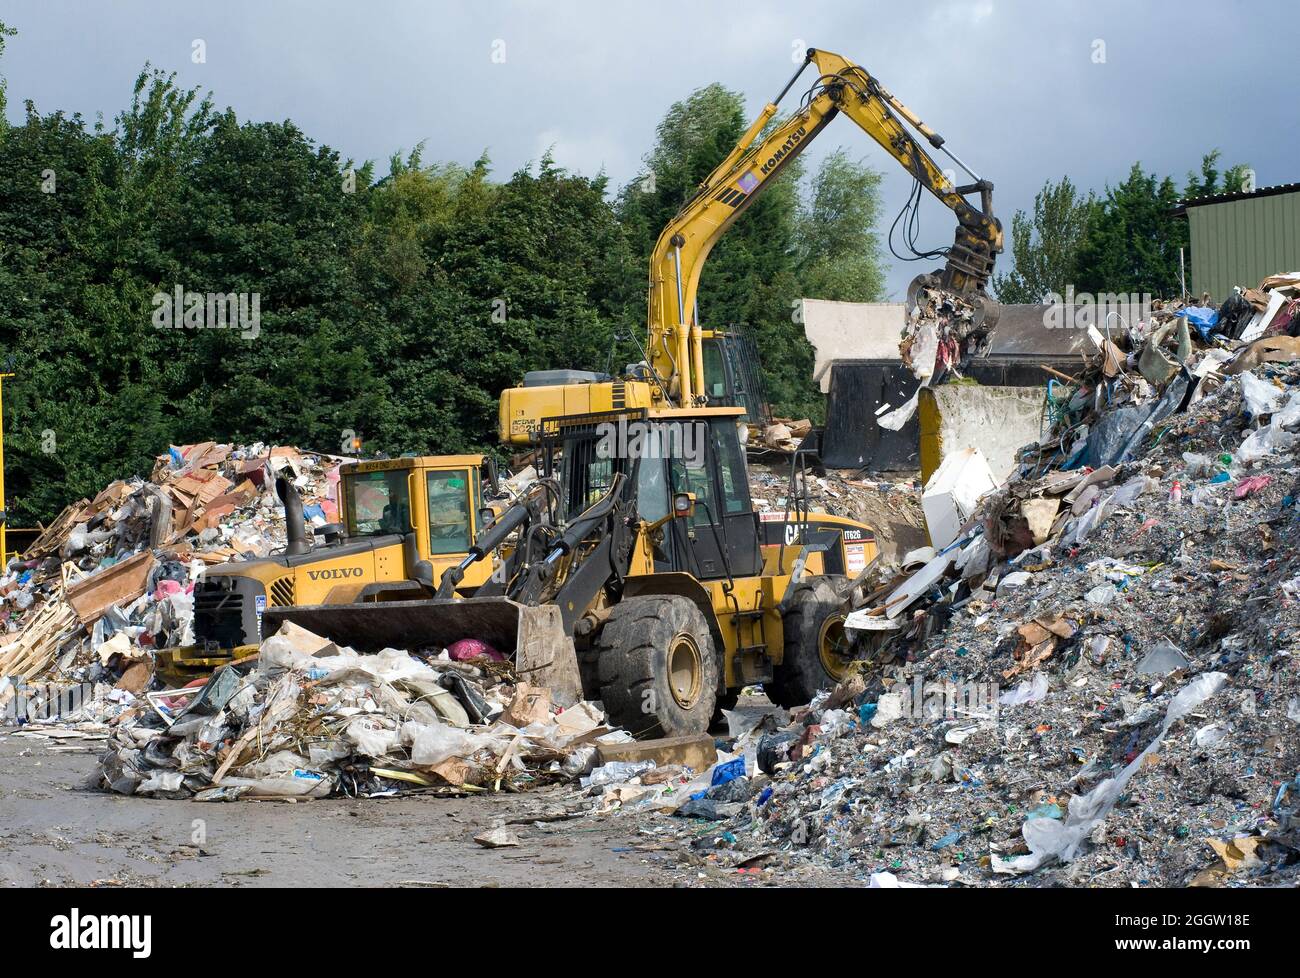 Cat wheel excavator working at a materials recycling facility in the UK. Stock Photo